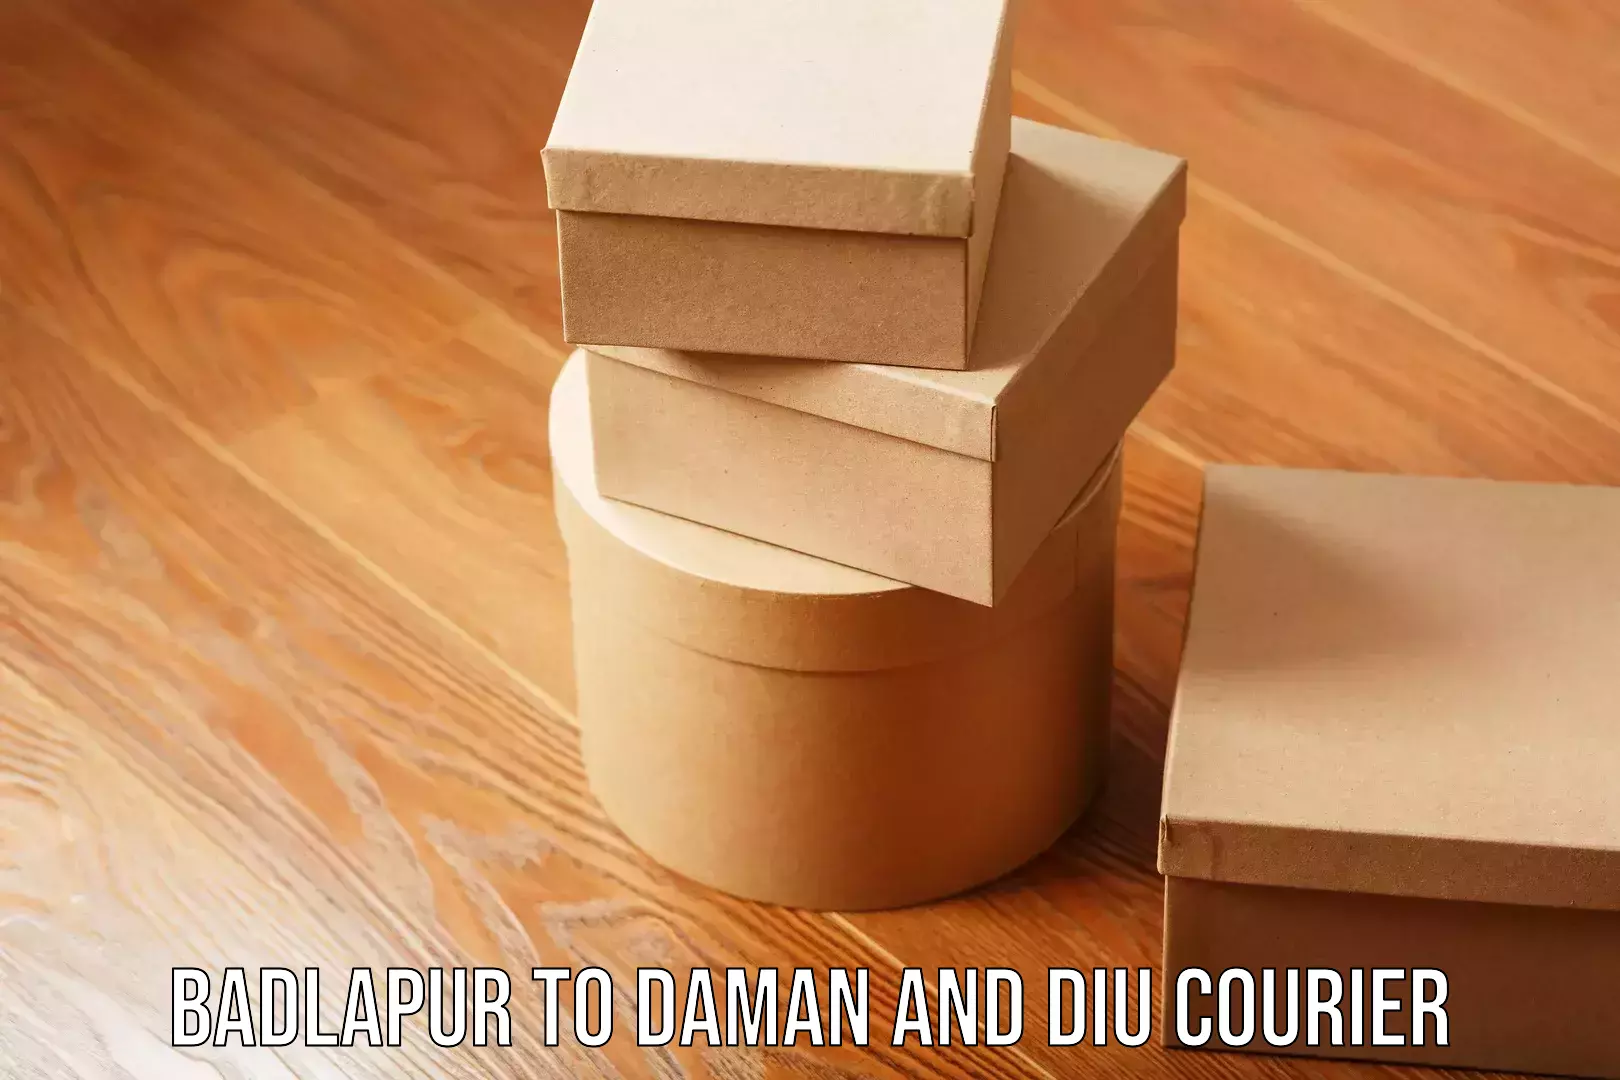 Full-service courier options Badlapur to Daman and Diu